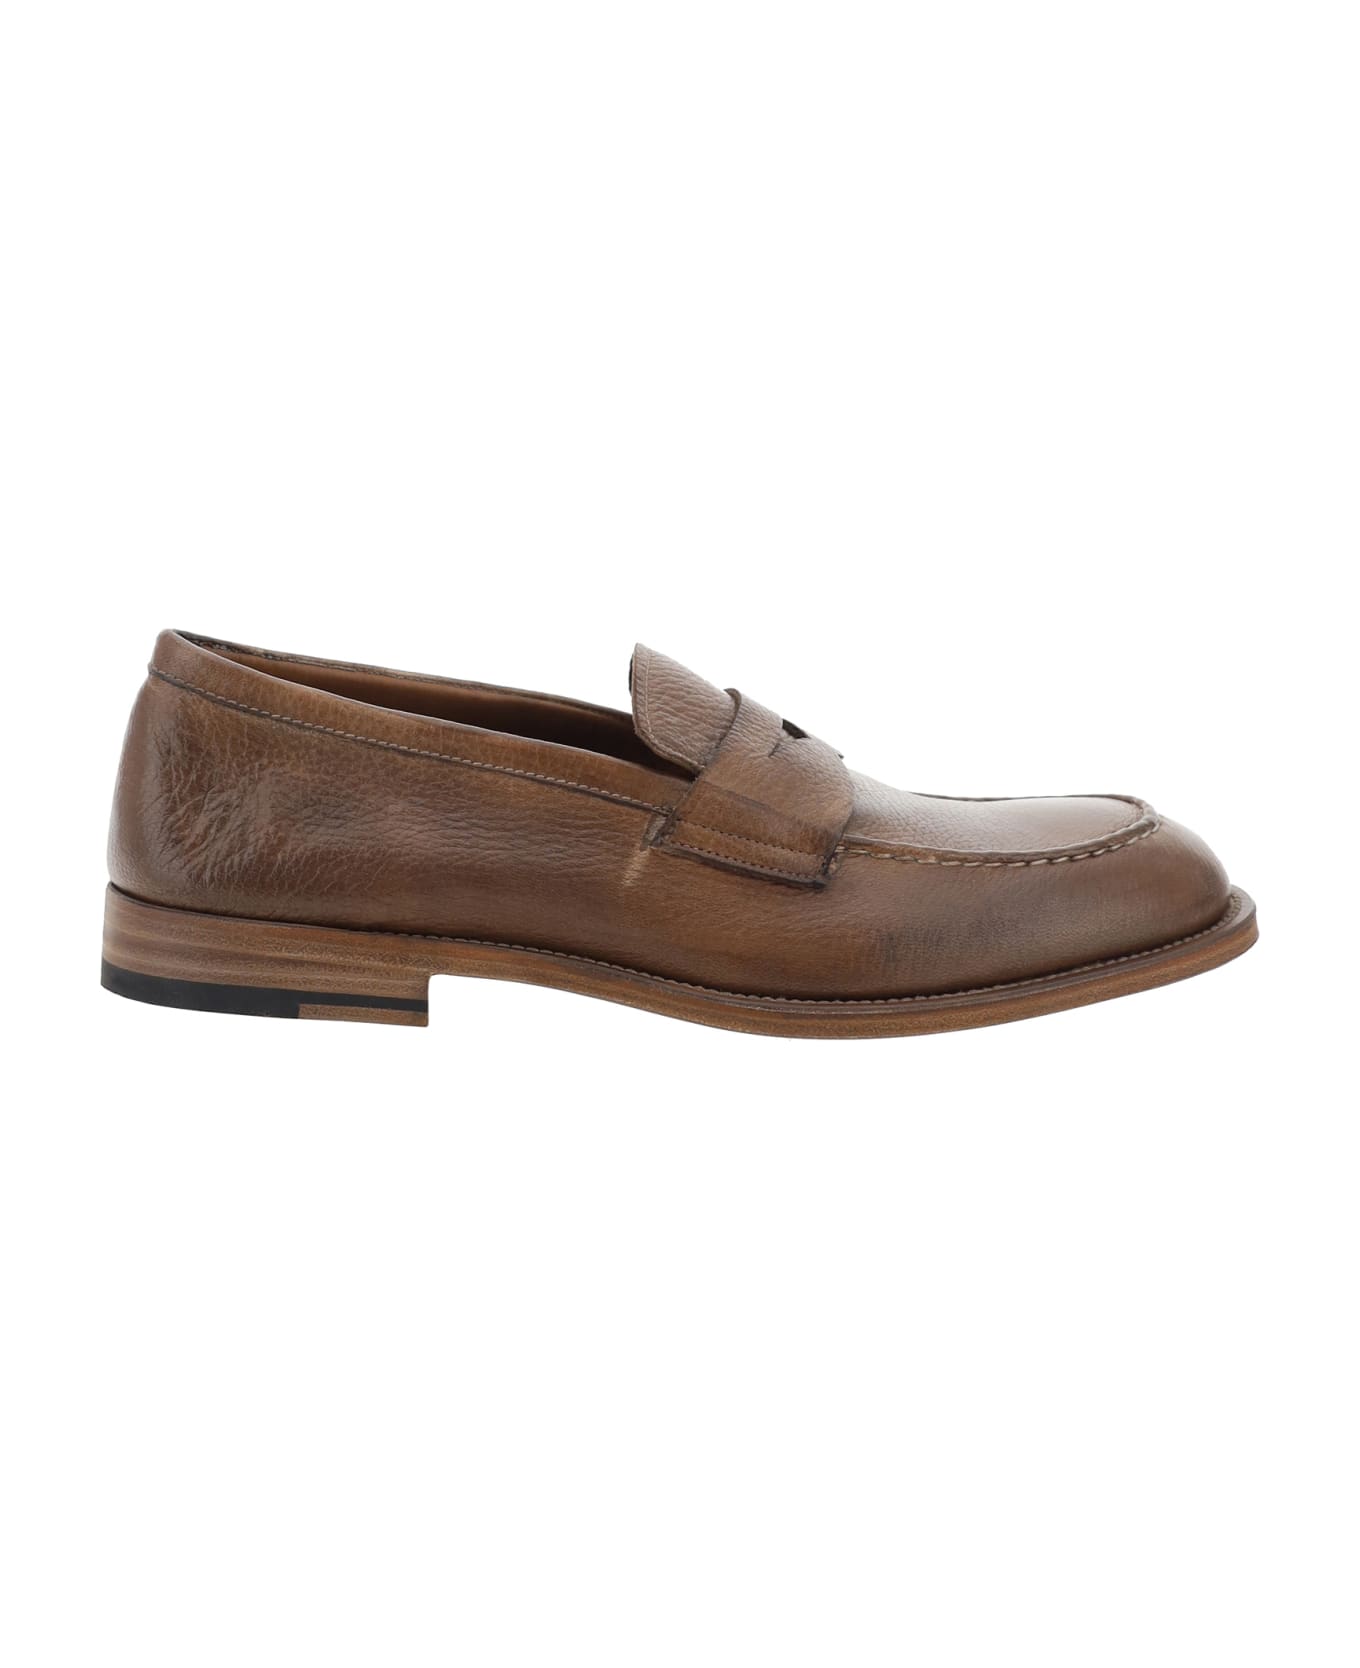 Fratelli Rossetti Loafers - Taupe